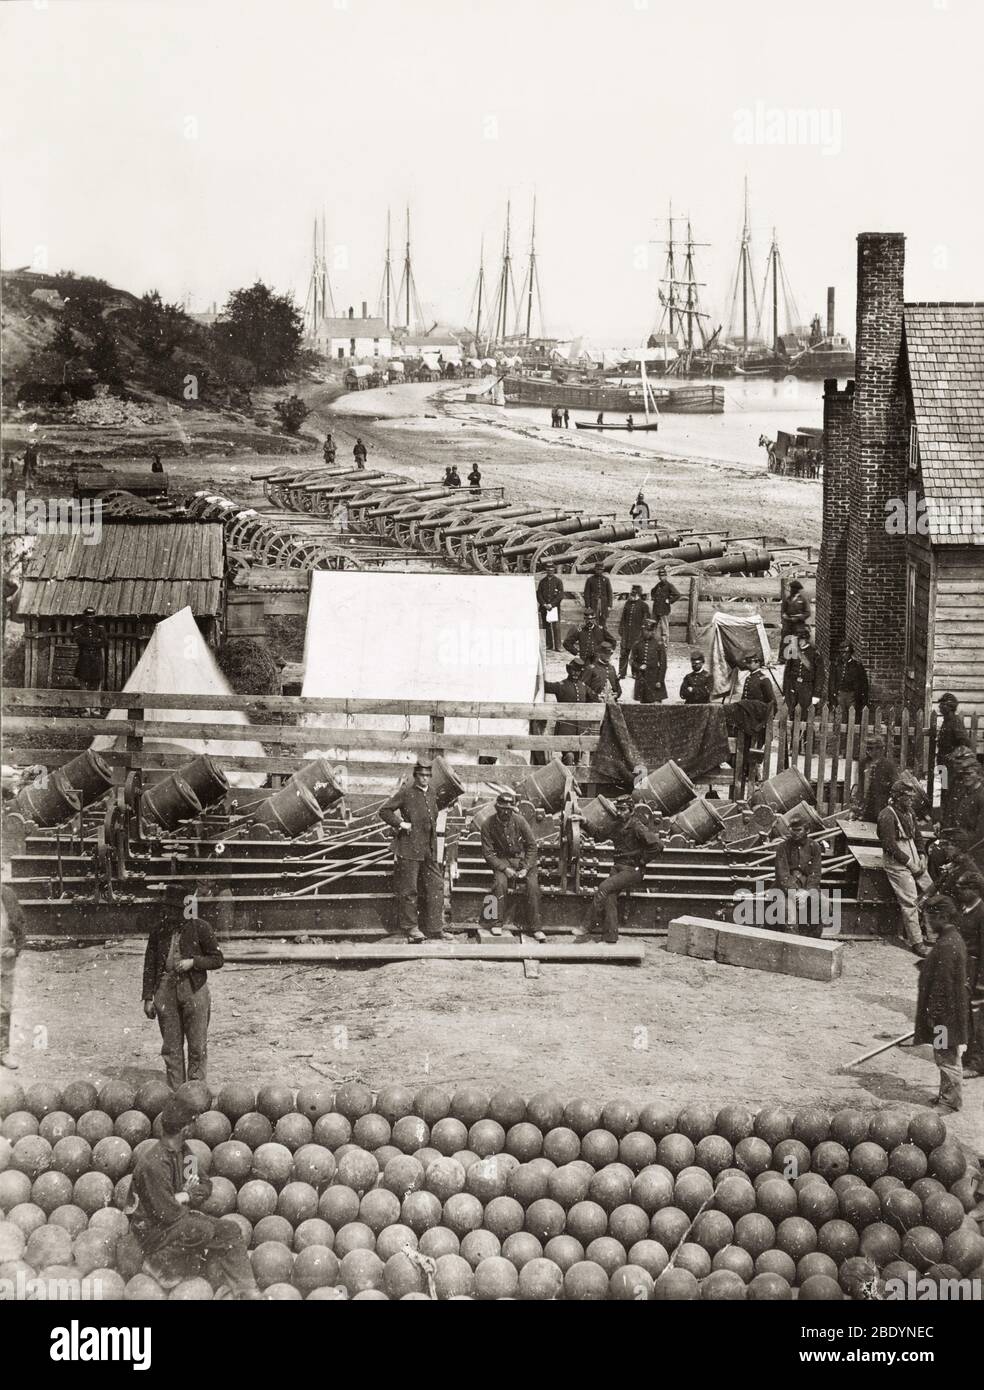 Cannons and Ships, Yorktown, Virginia, 1862 Stock Photo